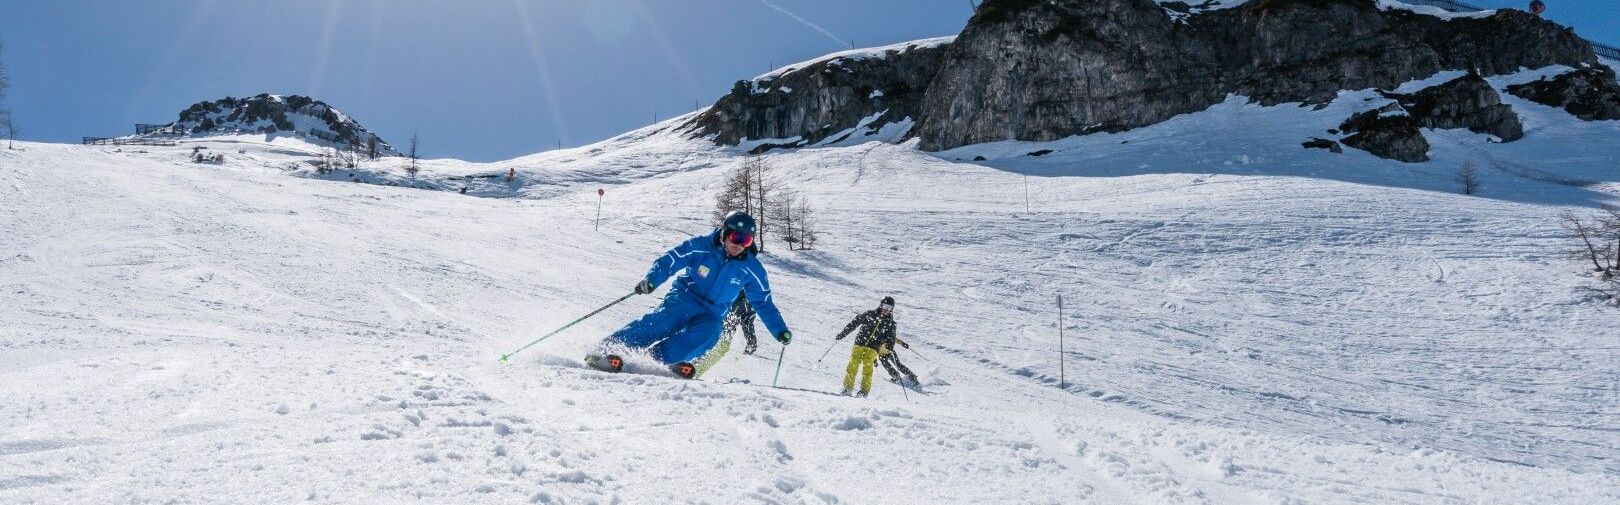 Ski courses for adults in Flachau - for beginners to professionals